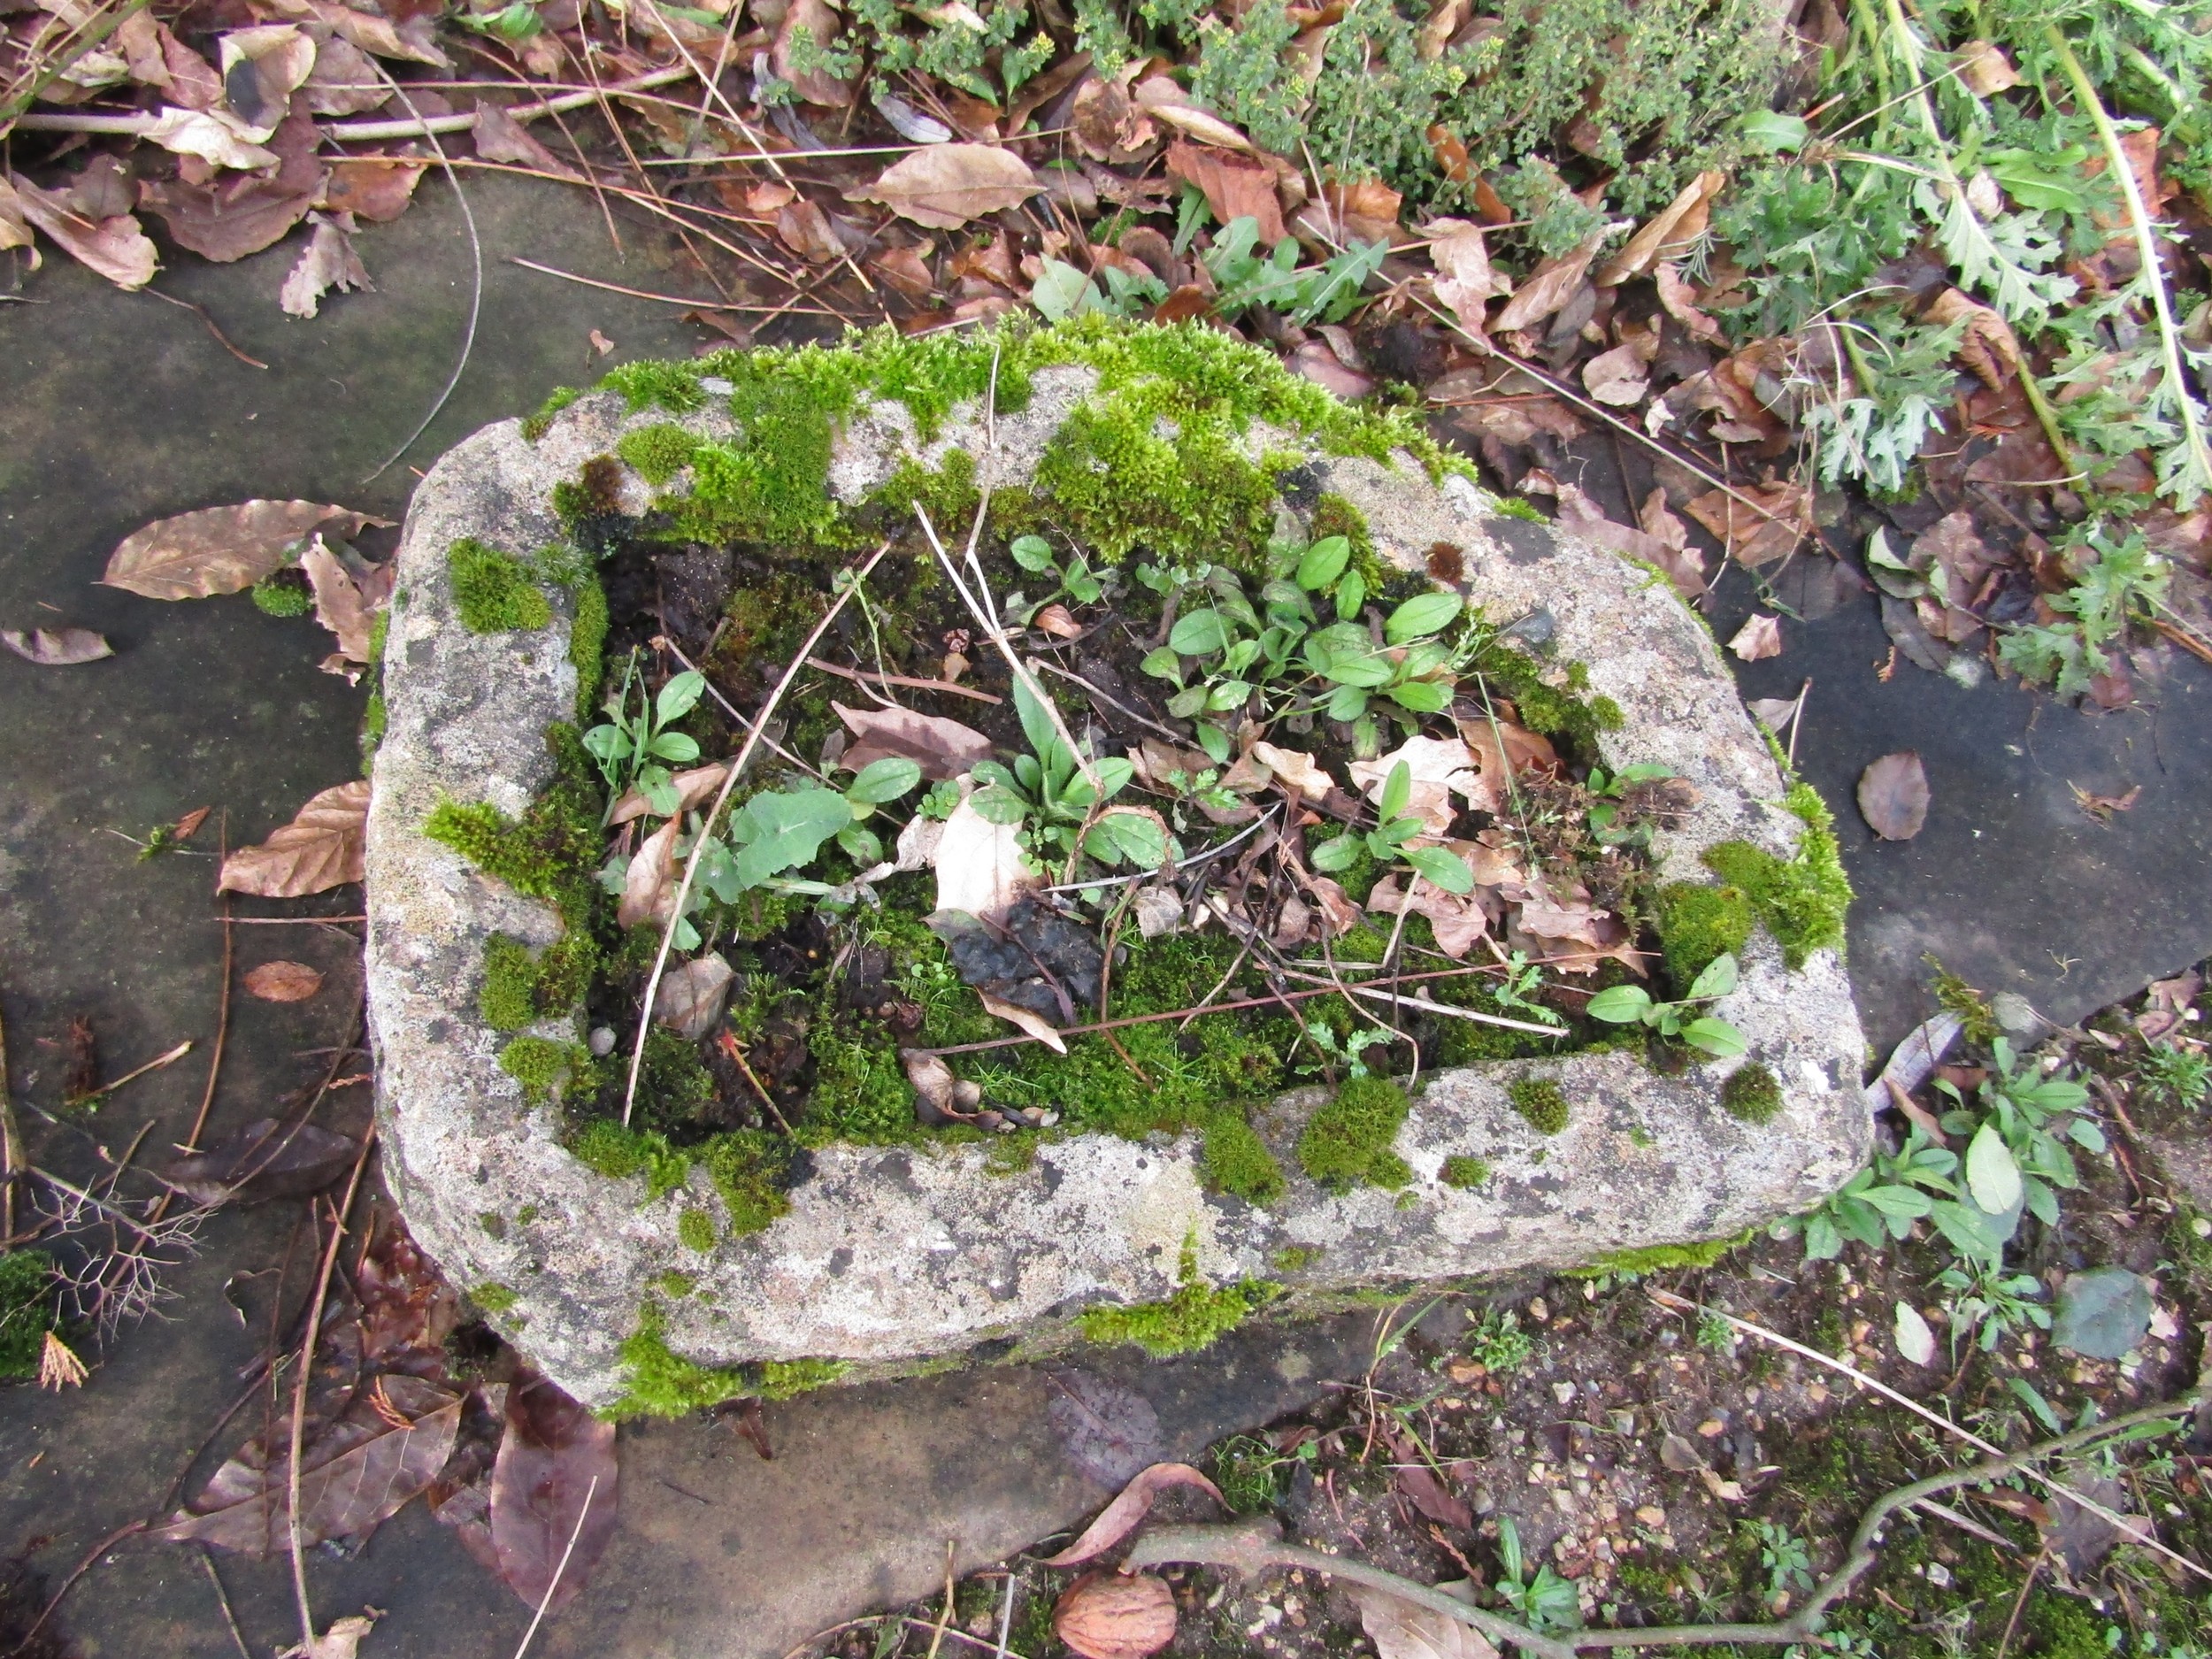 Two small ancient rough hewn planters/troughs, 45 cm wide and 35 cm wide approximately